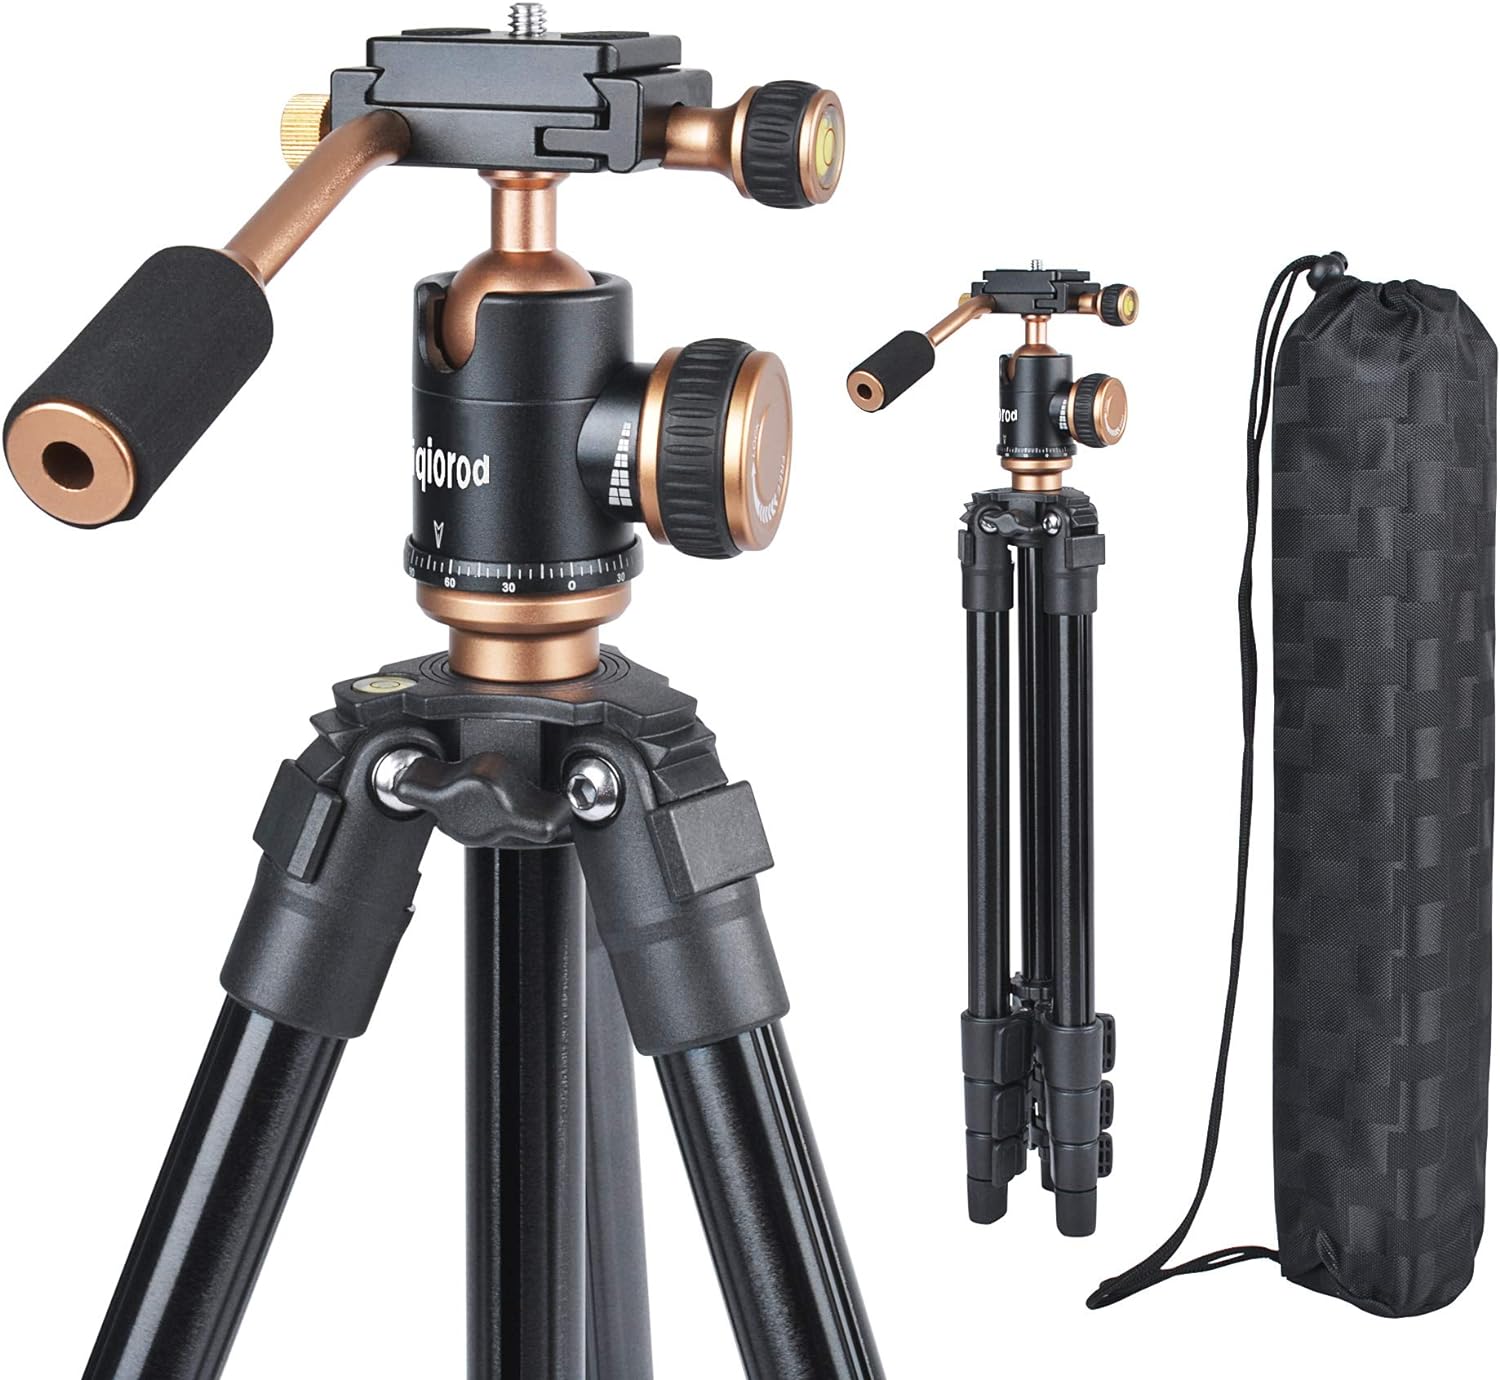 How to Choose the Right Tripod for Your Camera